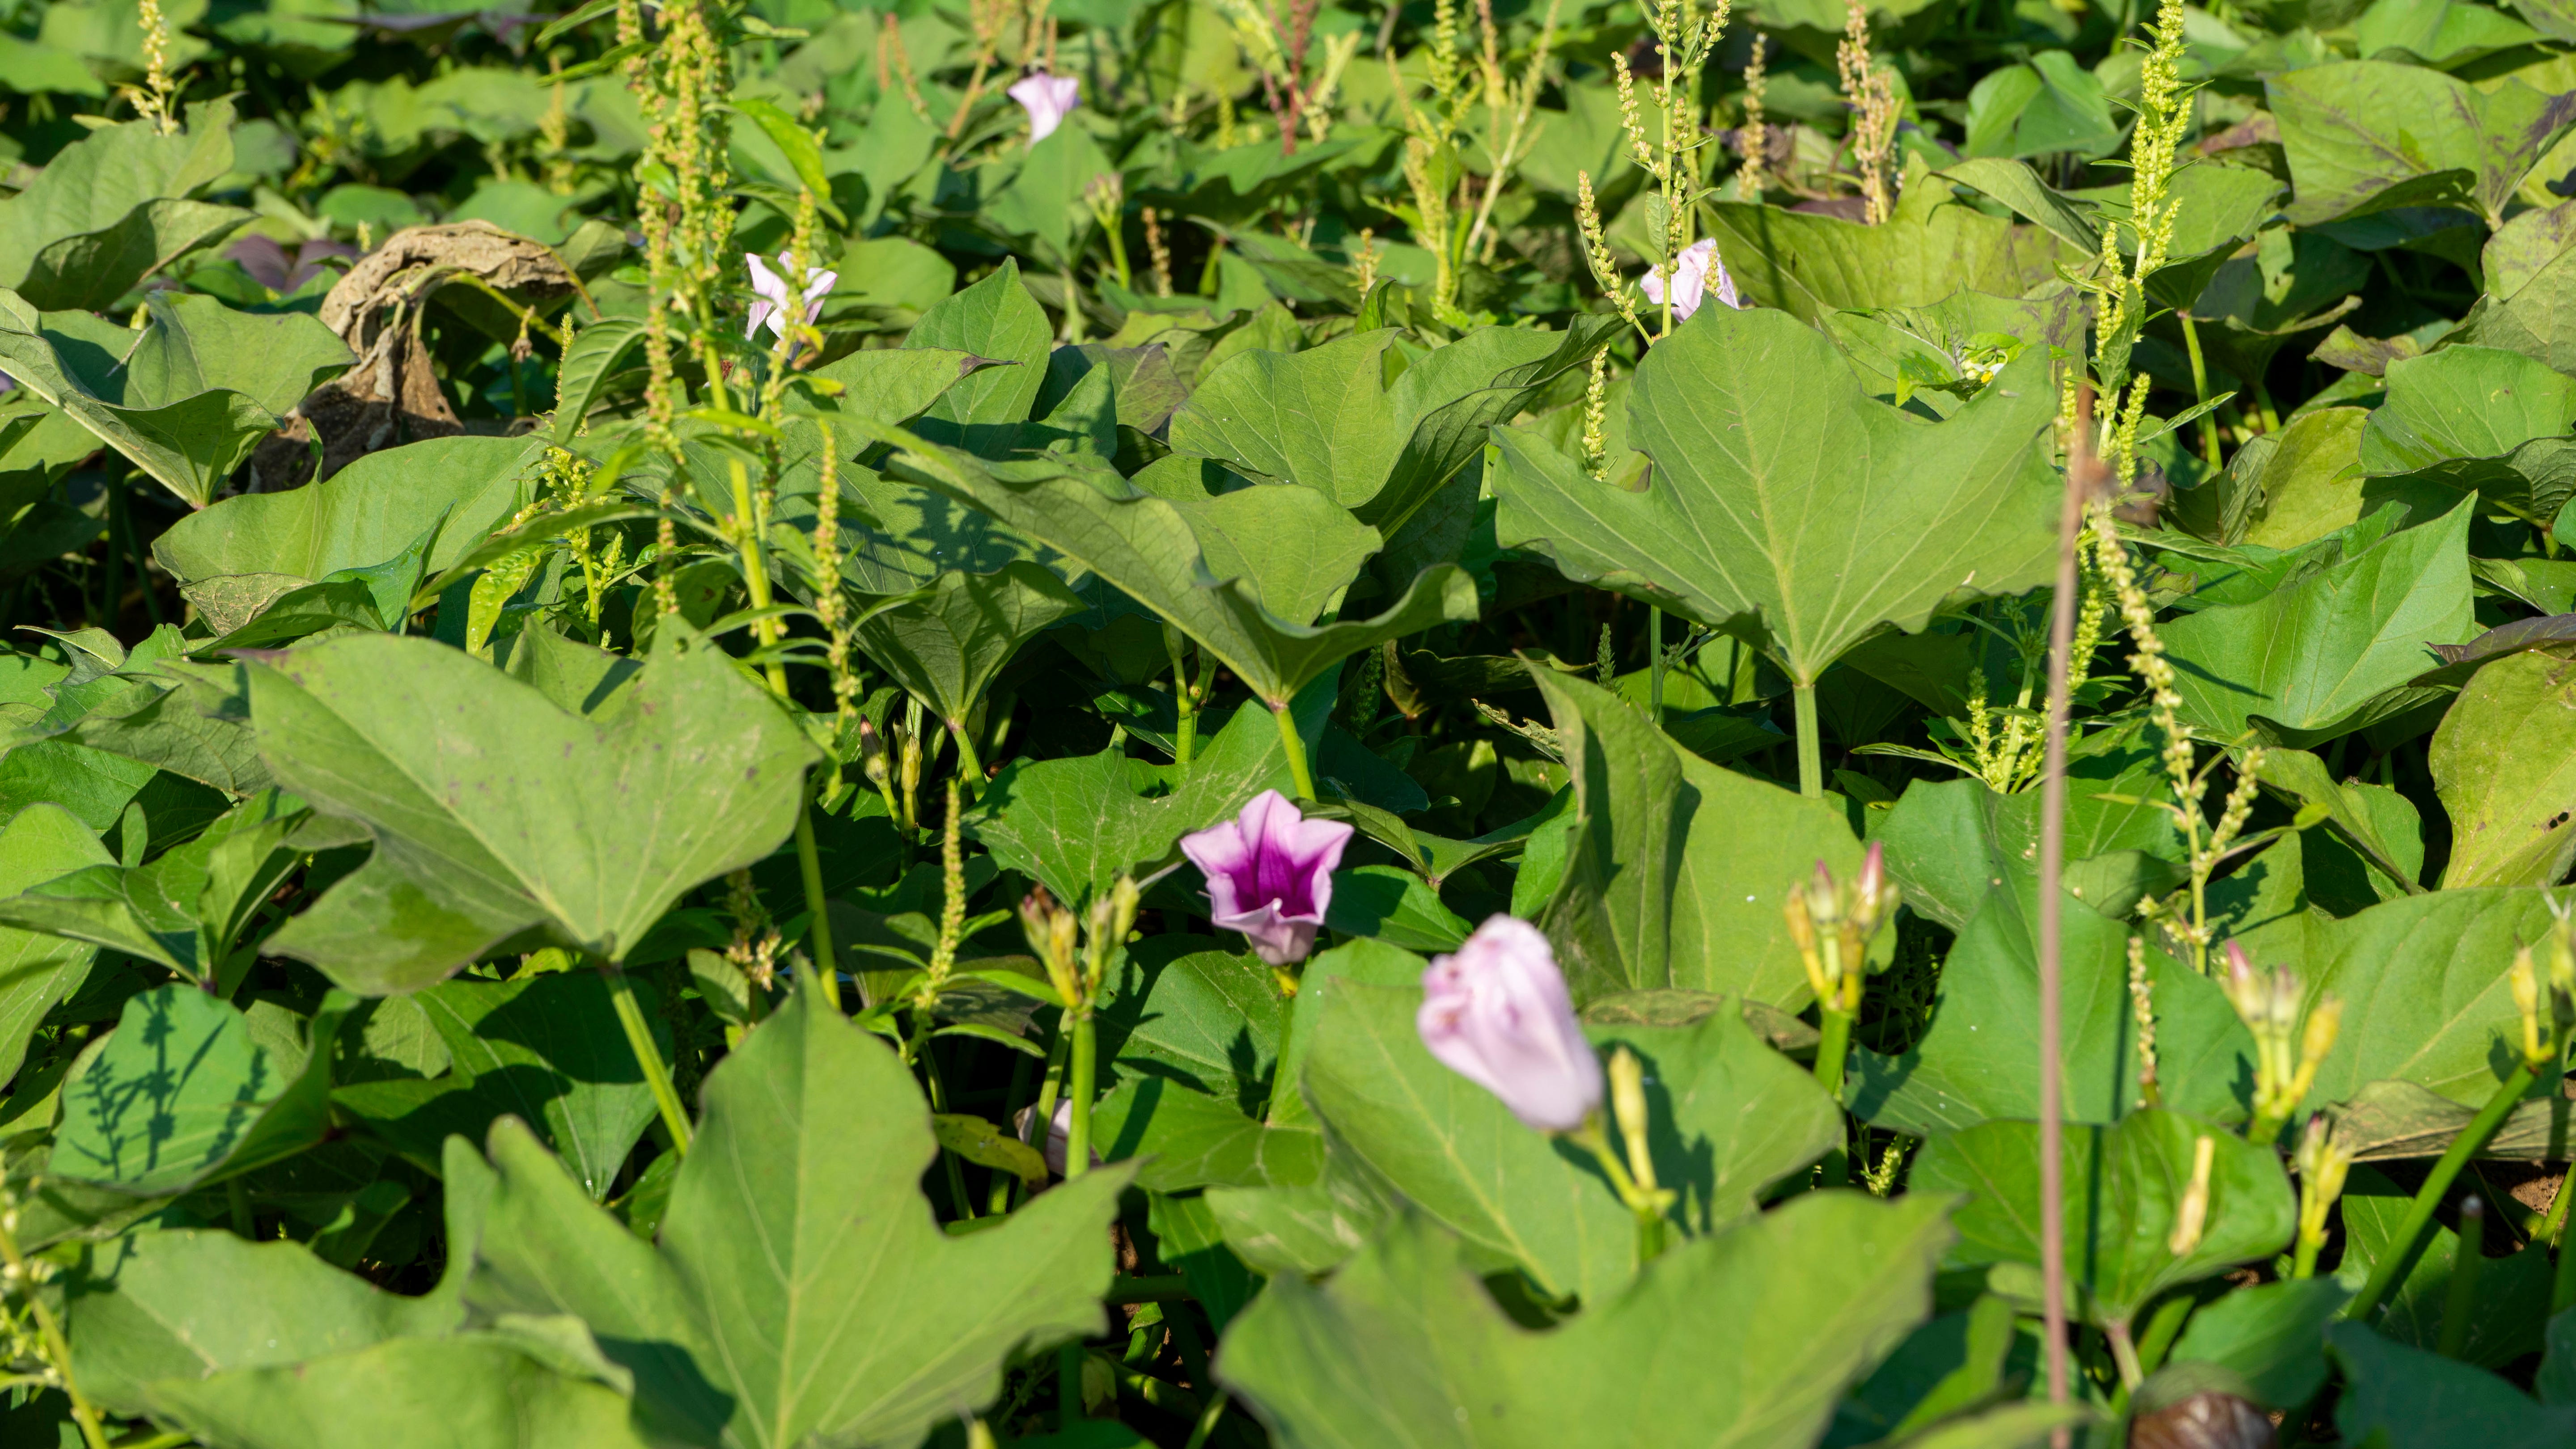 A field full of purple flowers and green sweet potato leaves.